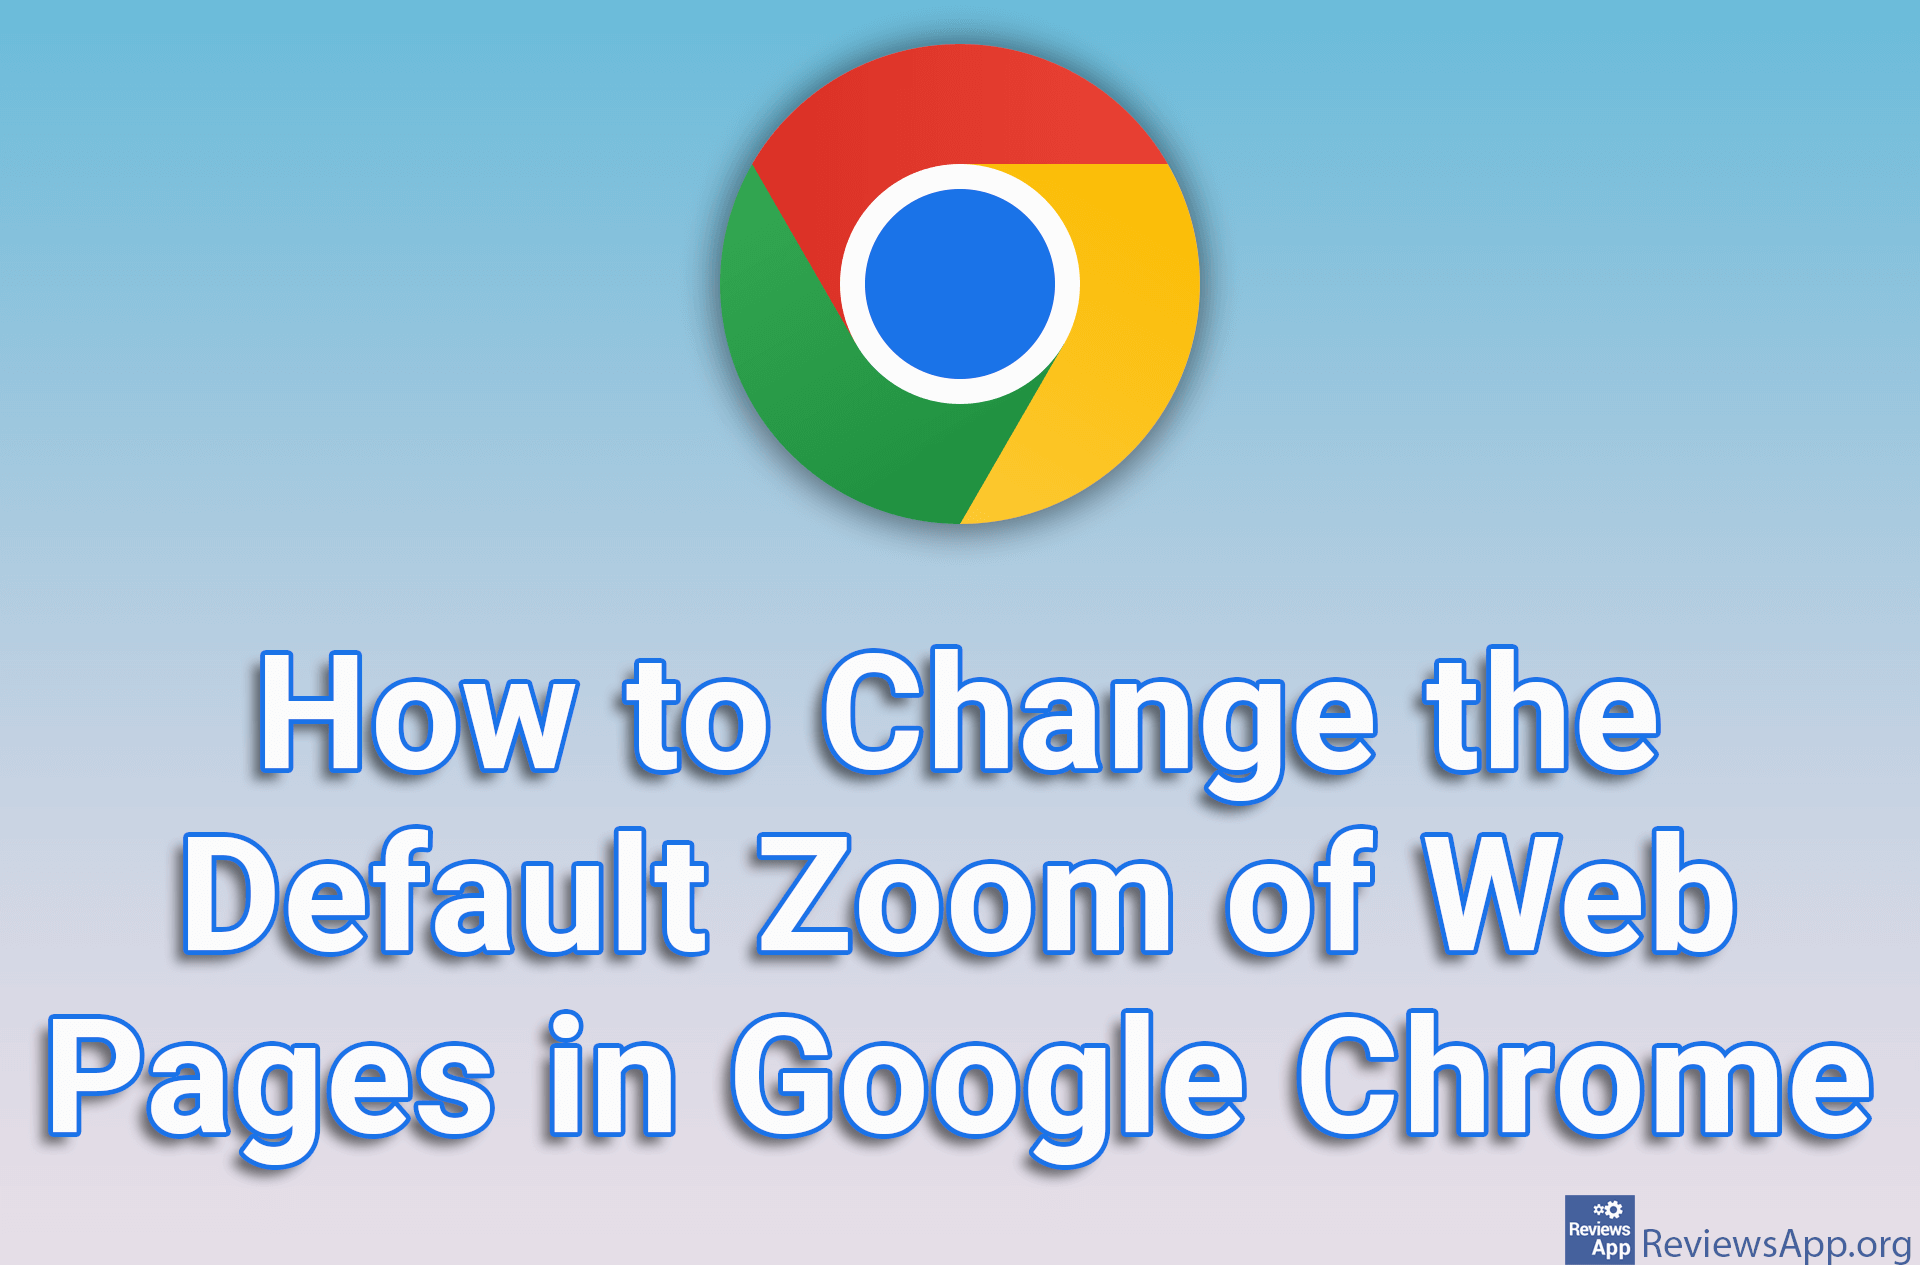 How to Change the Default Zoom of Web Pages in Google Chrome